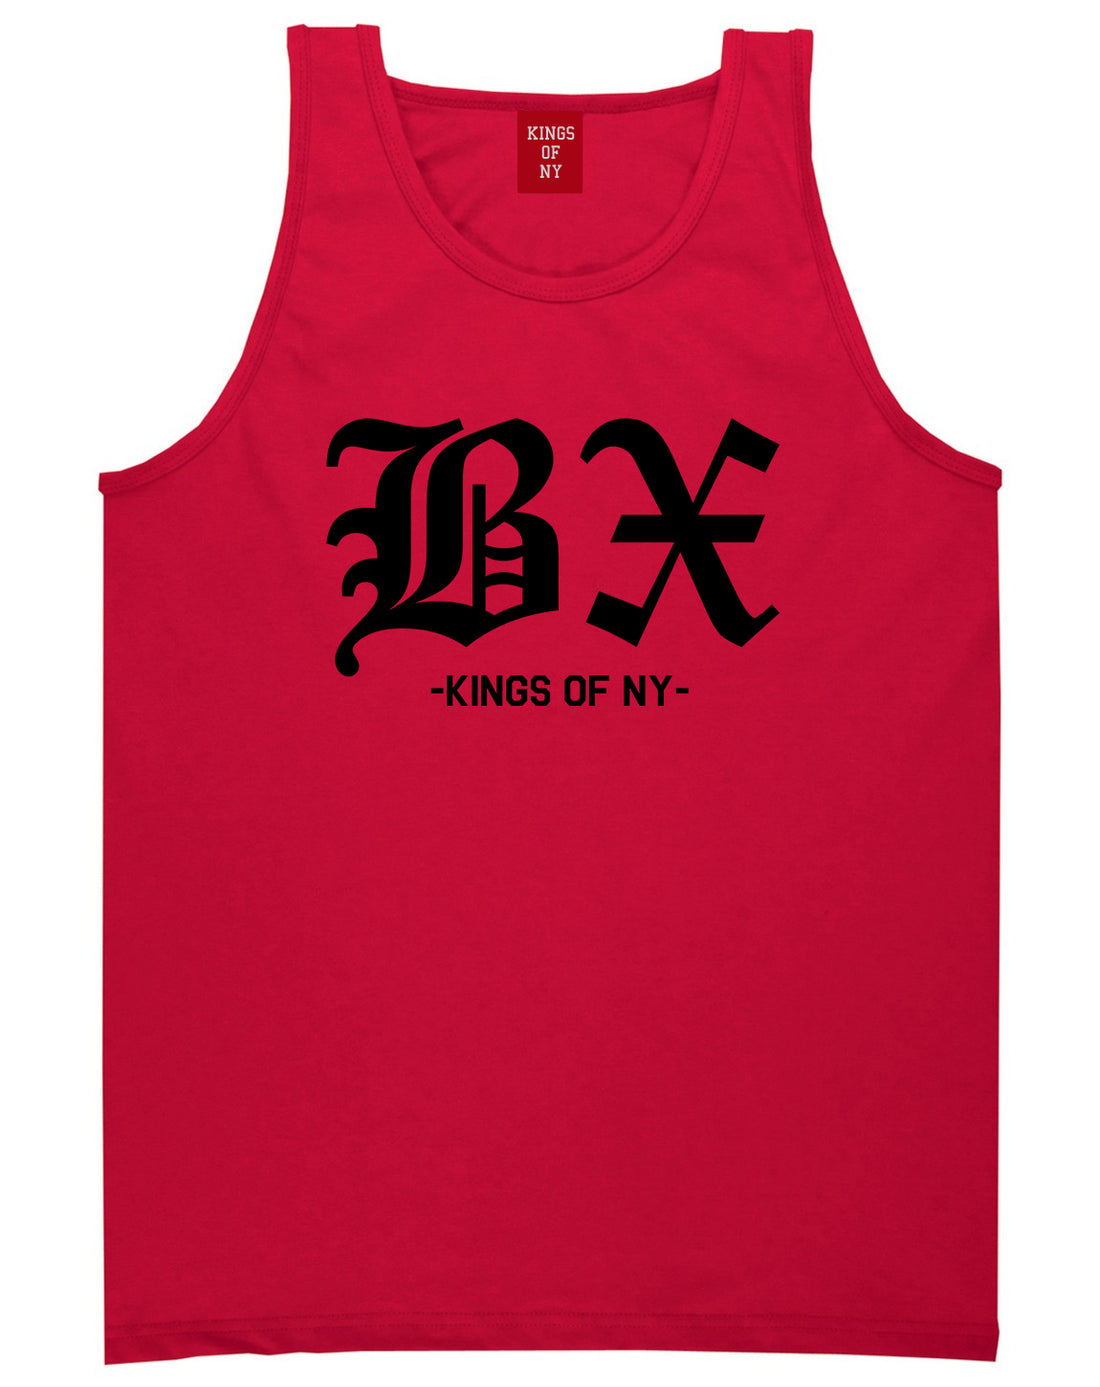 BX Old English Bronx New York Tank Top Shirt in Red